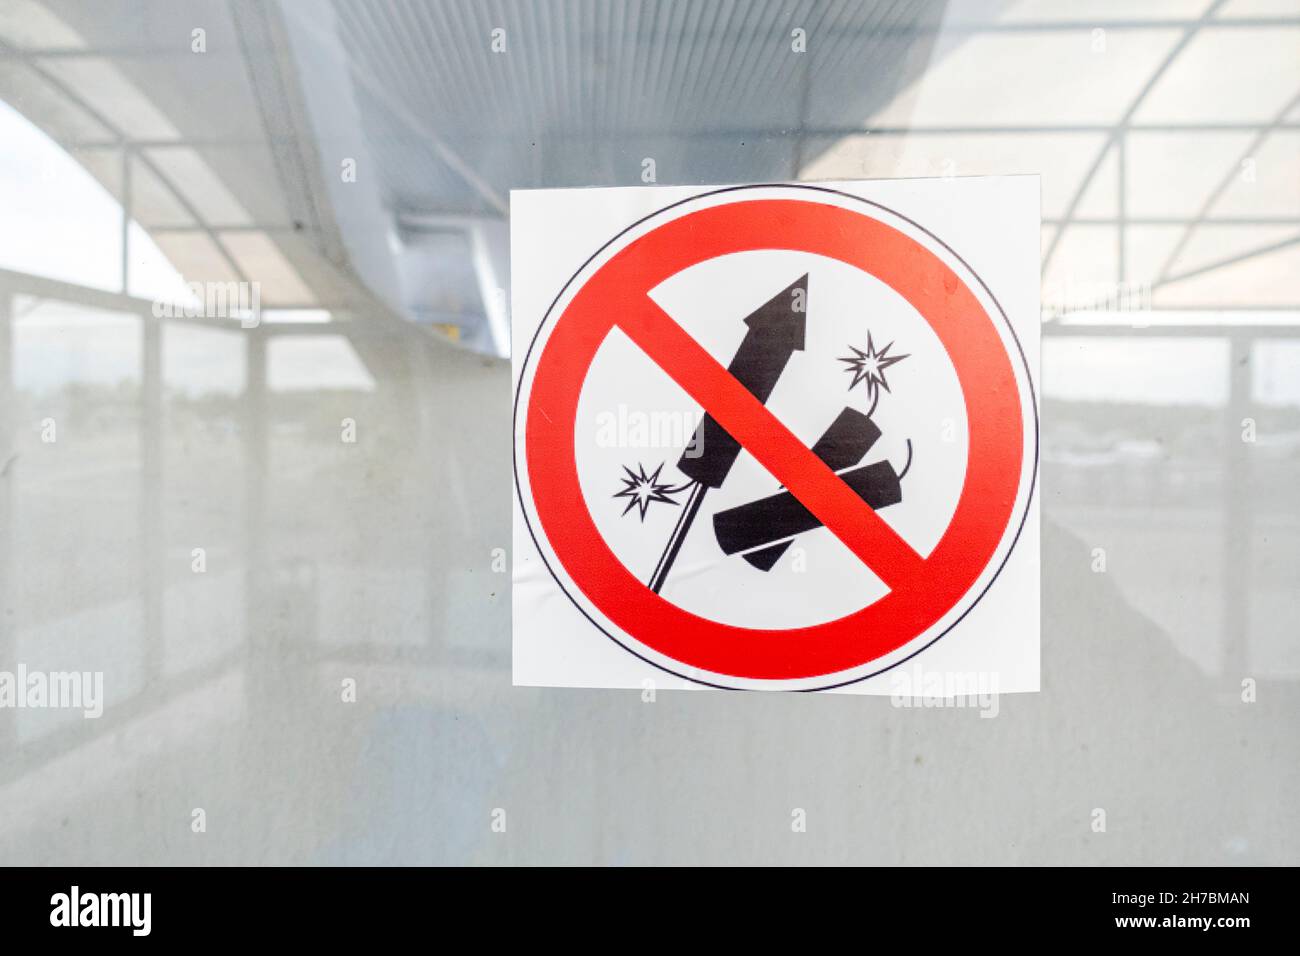 Sign prohibiting petards and fireworks Stock Photo